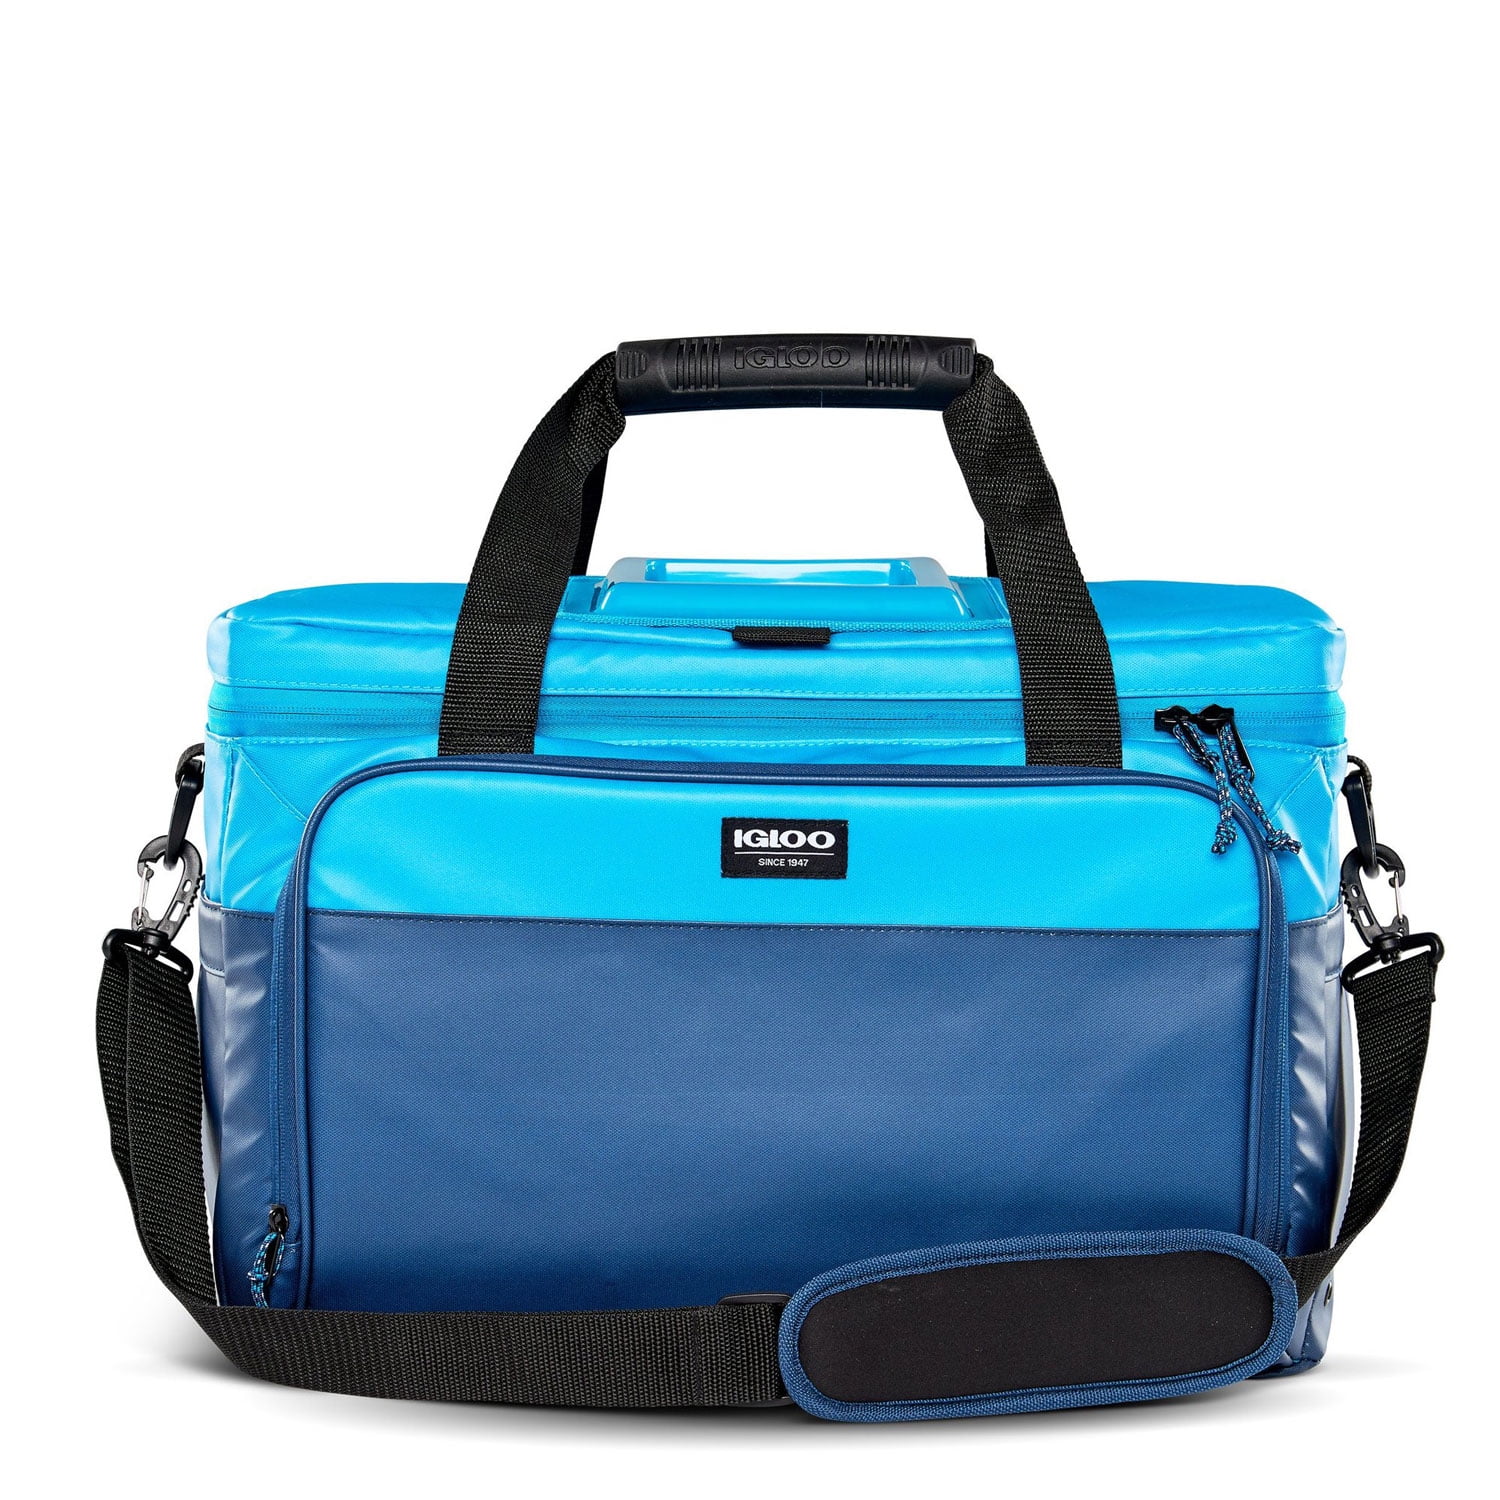 Igloo Coast Durable & Compact Insulated 36 Can Cooler Duffel Bag, Blue ...